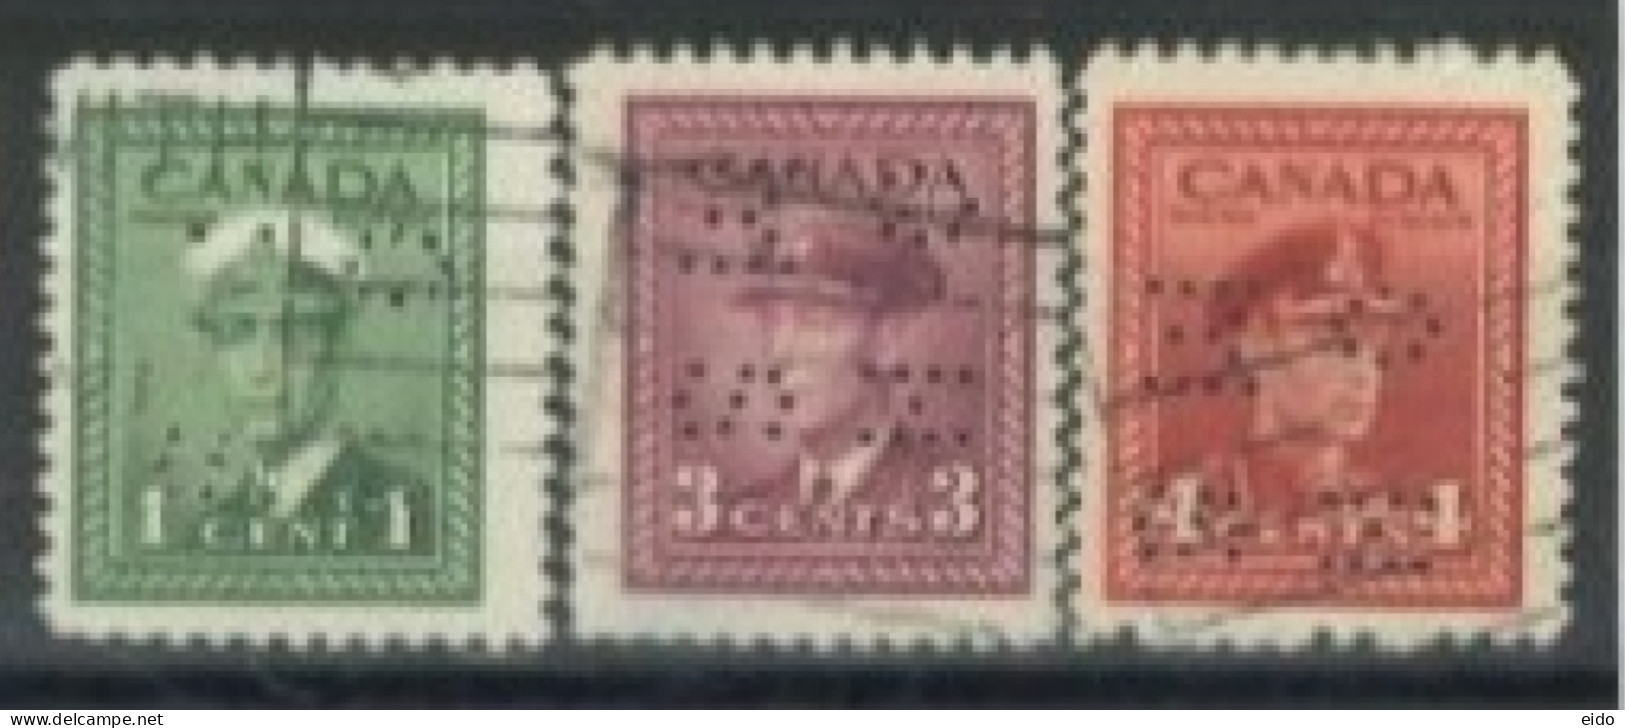 CANADA - 1942, KING GEORGE VI IN NAVAL UNIFORM STAMPS SET OF 3, USED. - Usati